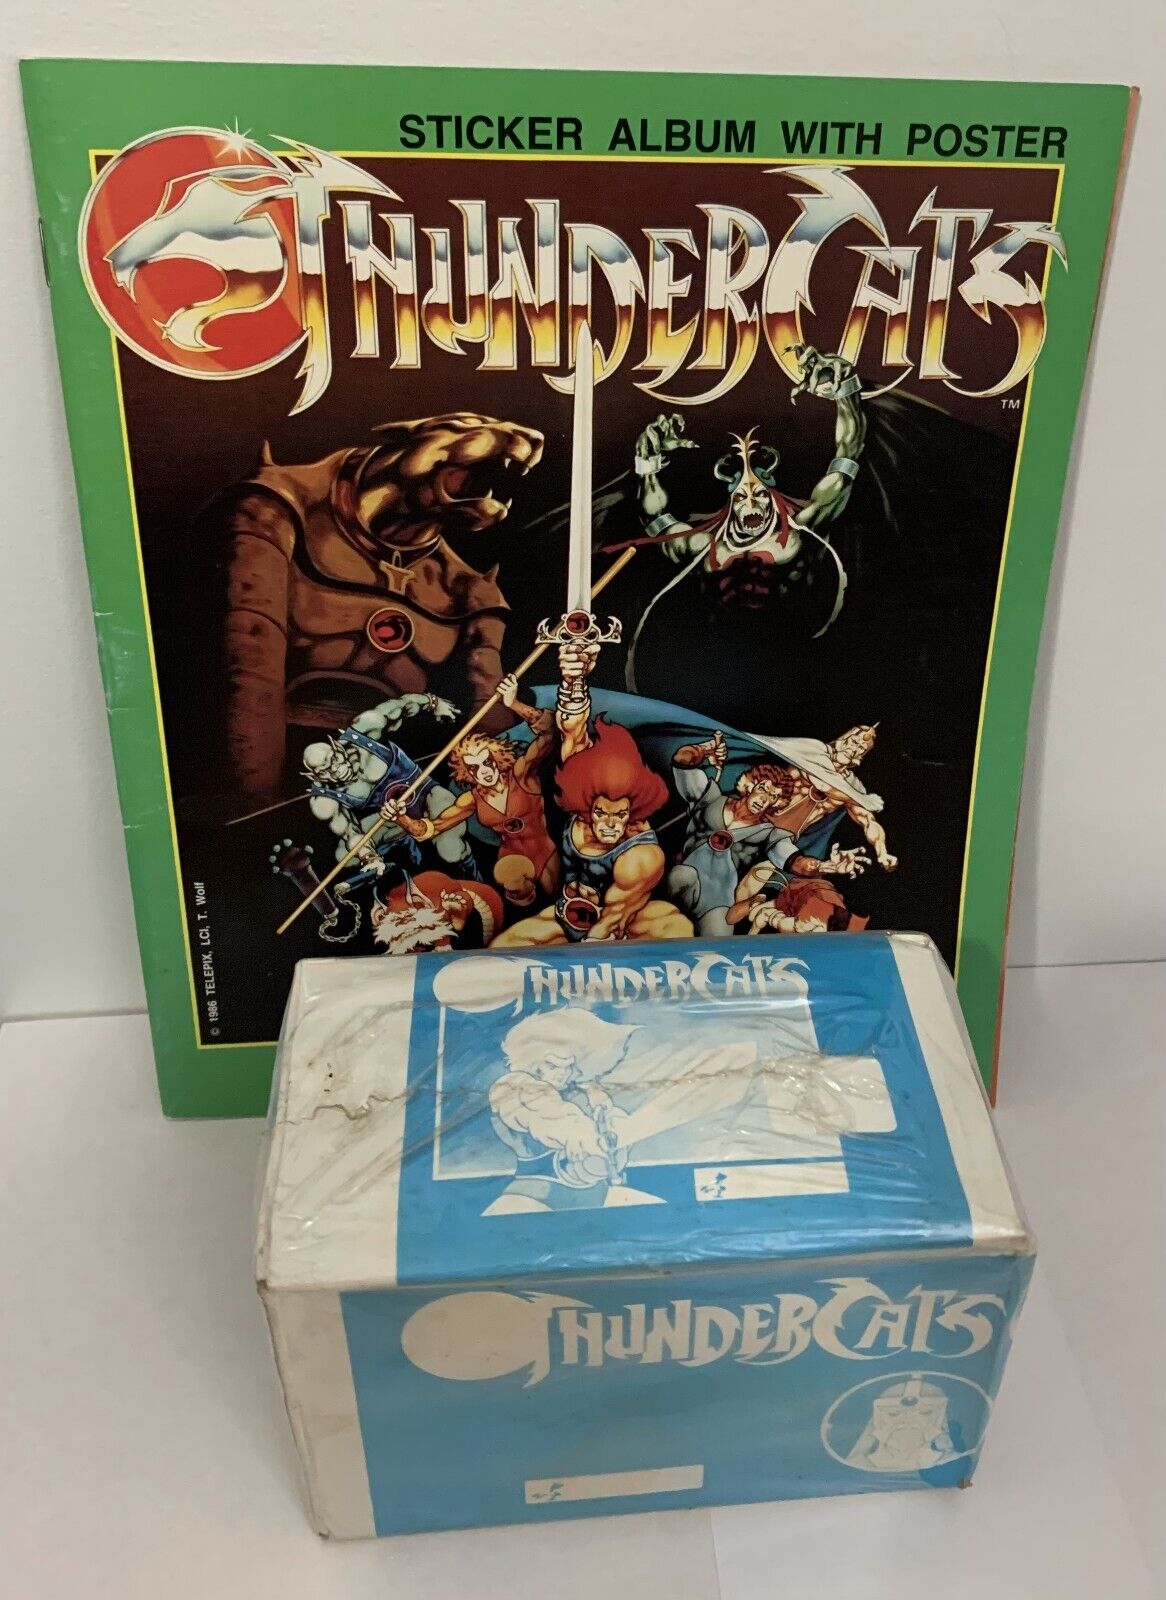 1986 Thunder Cats Unopened Box of 200 Sticker Packs & New Album with Poster